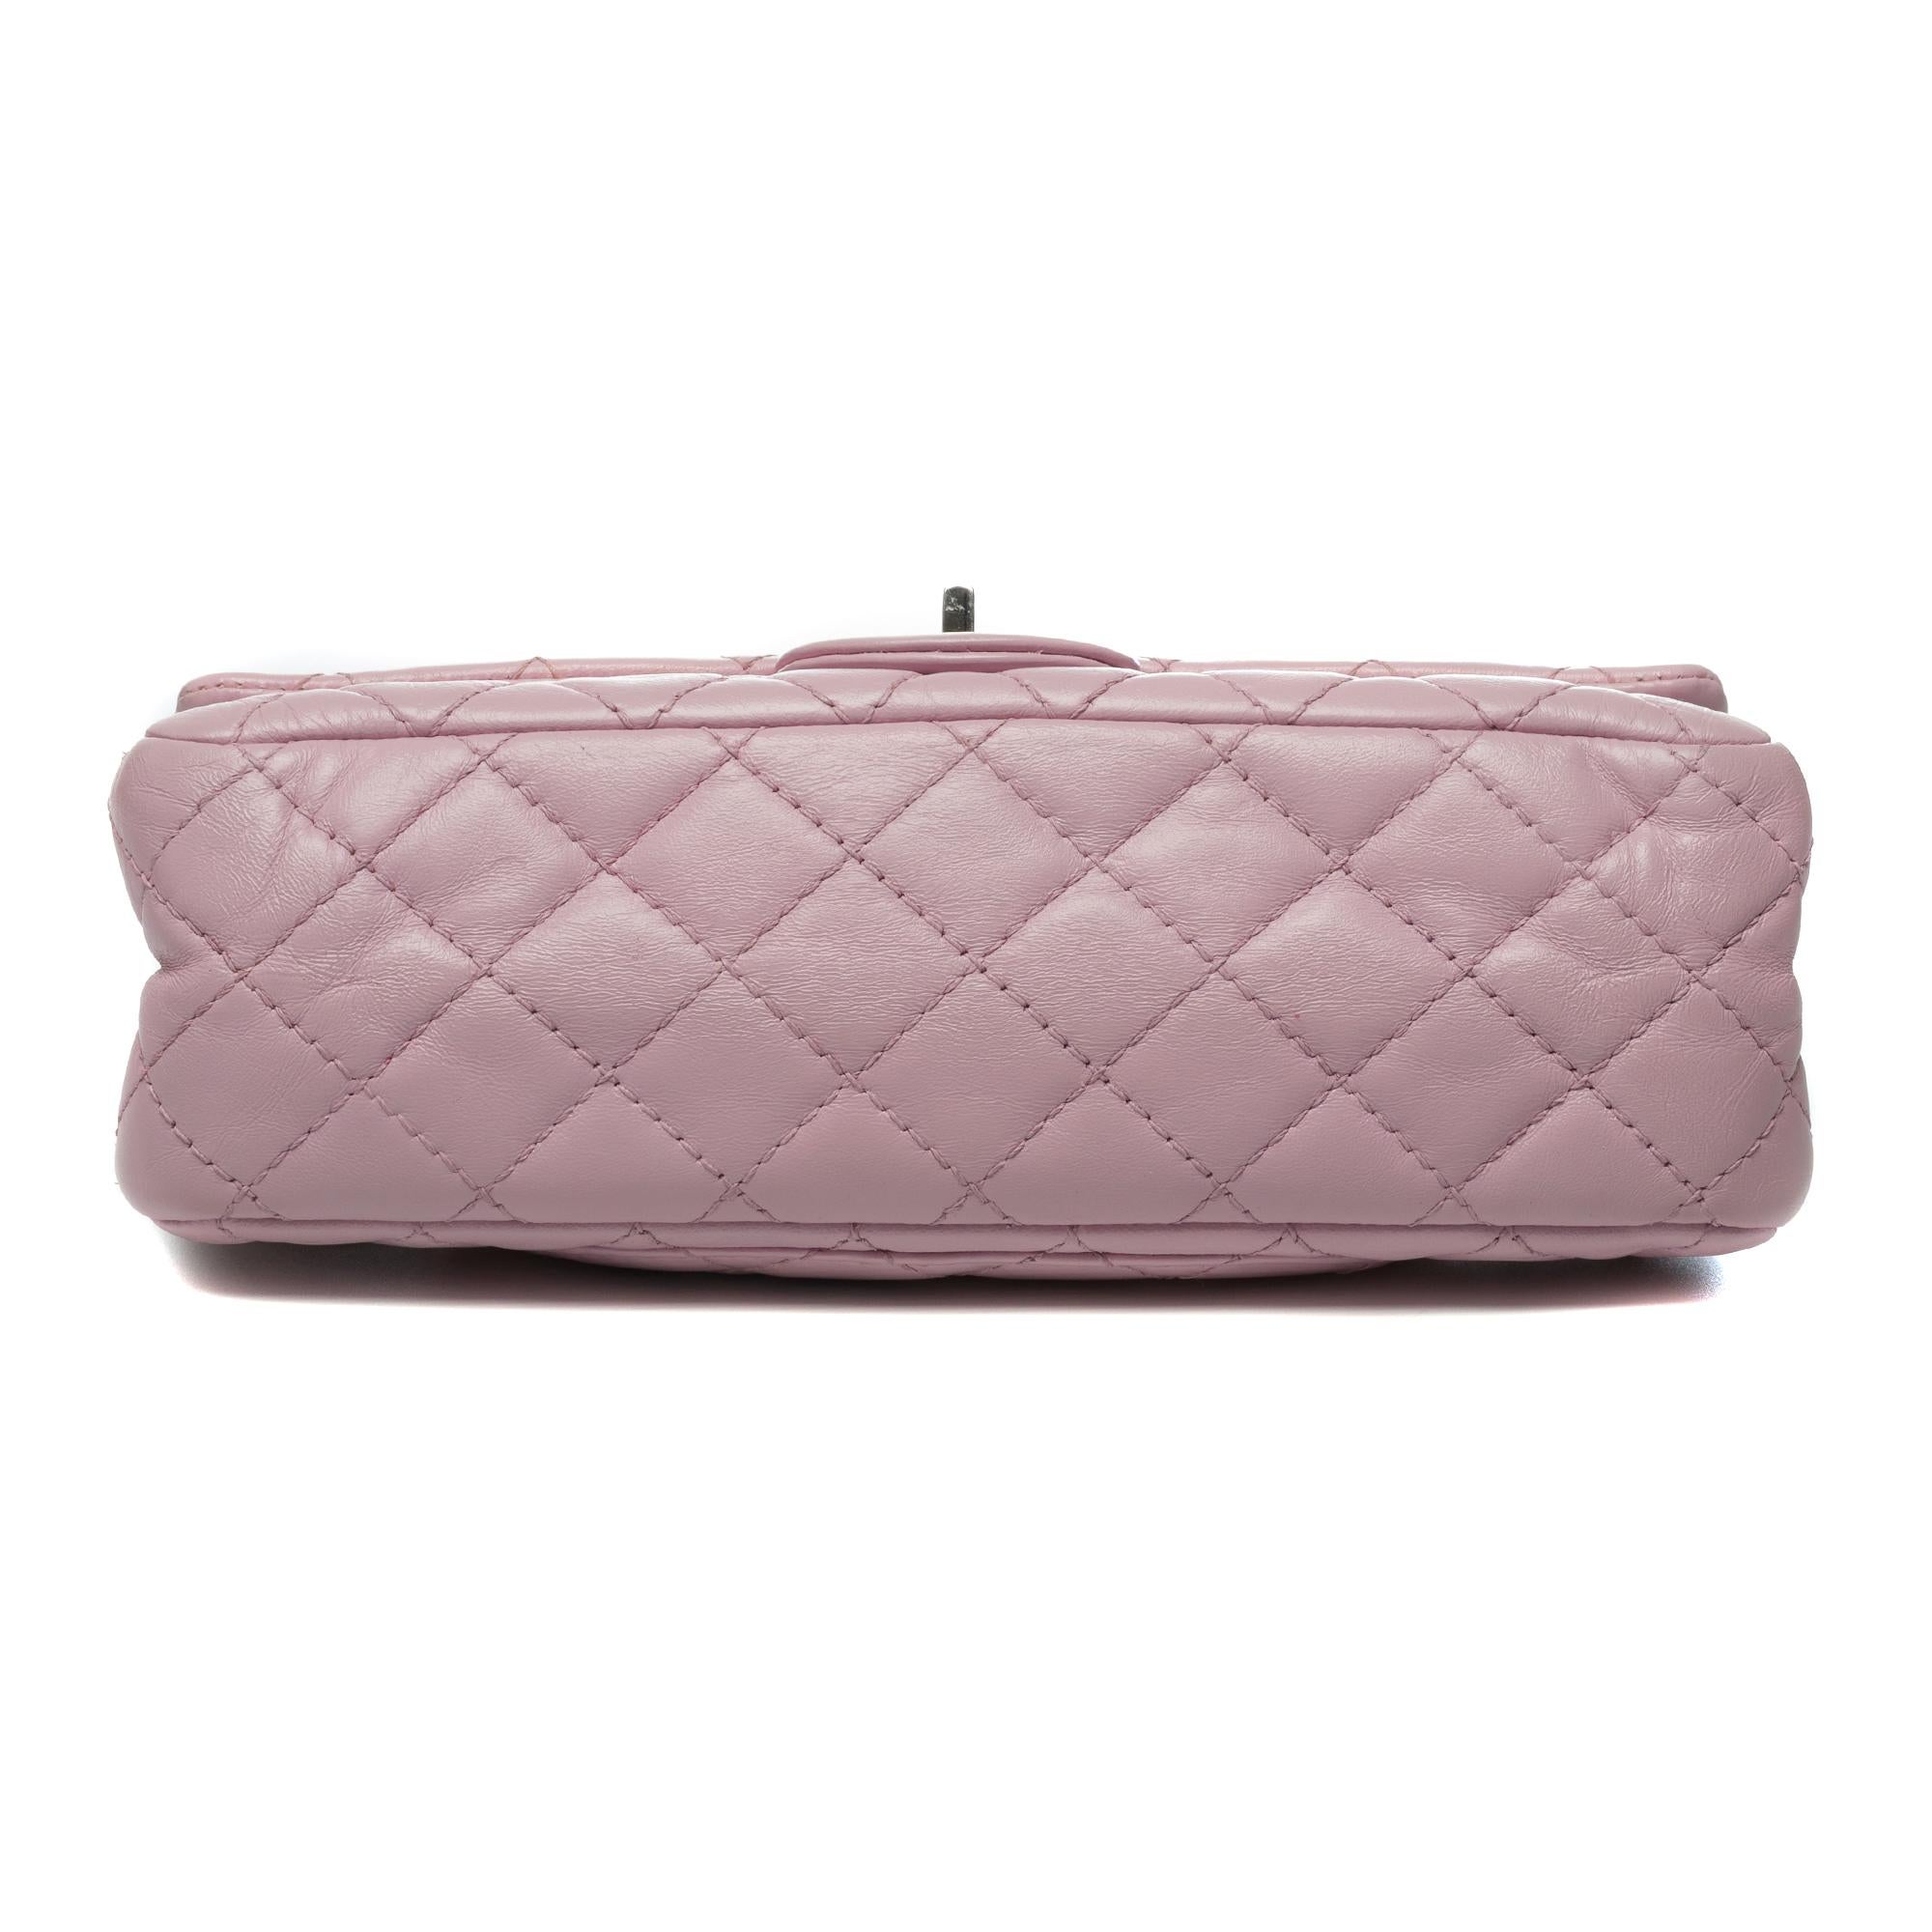 Stunning Chanel 2.55 shoulder bag in pink quilted leather with silver hardware 1